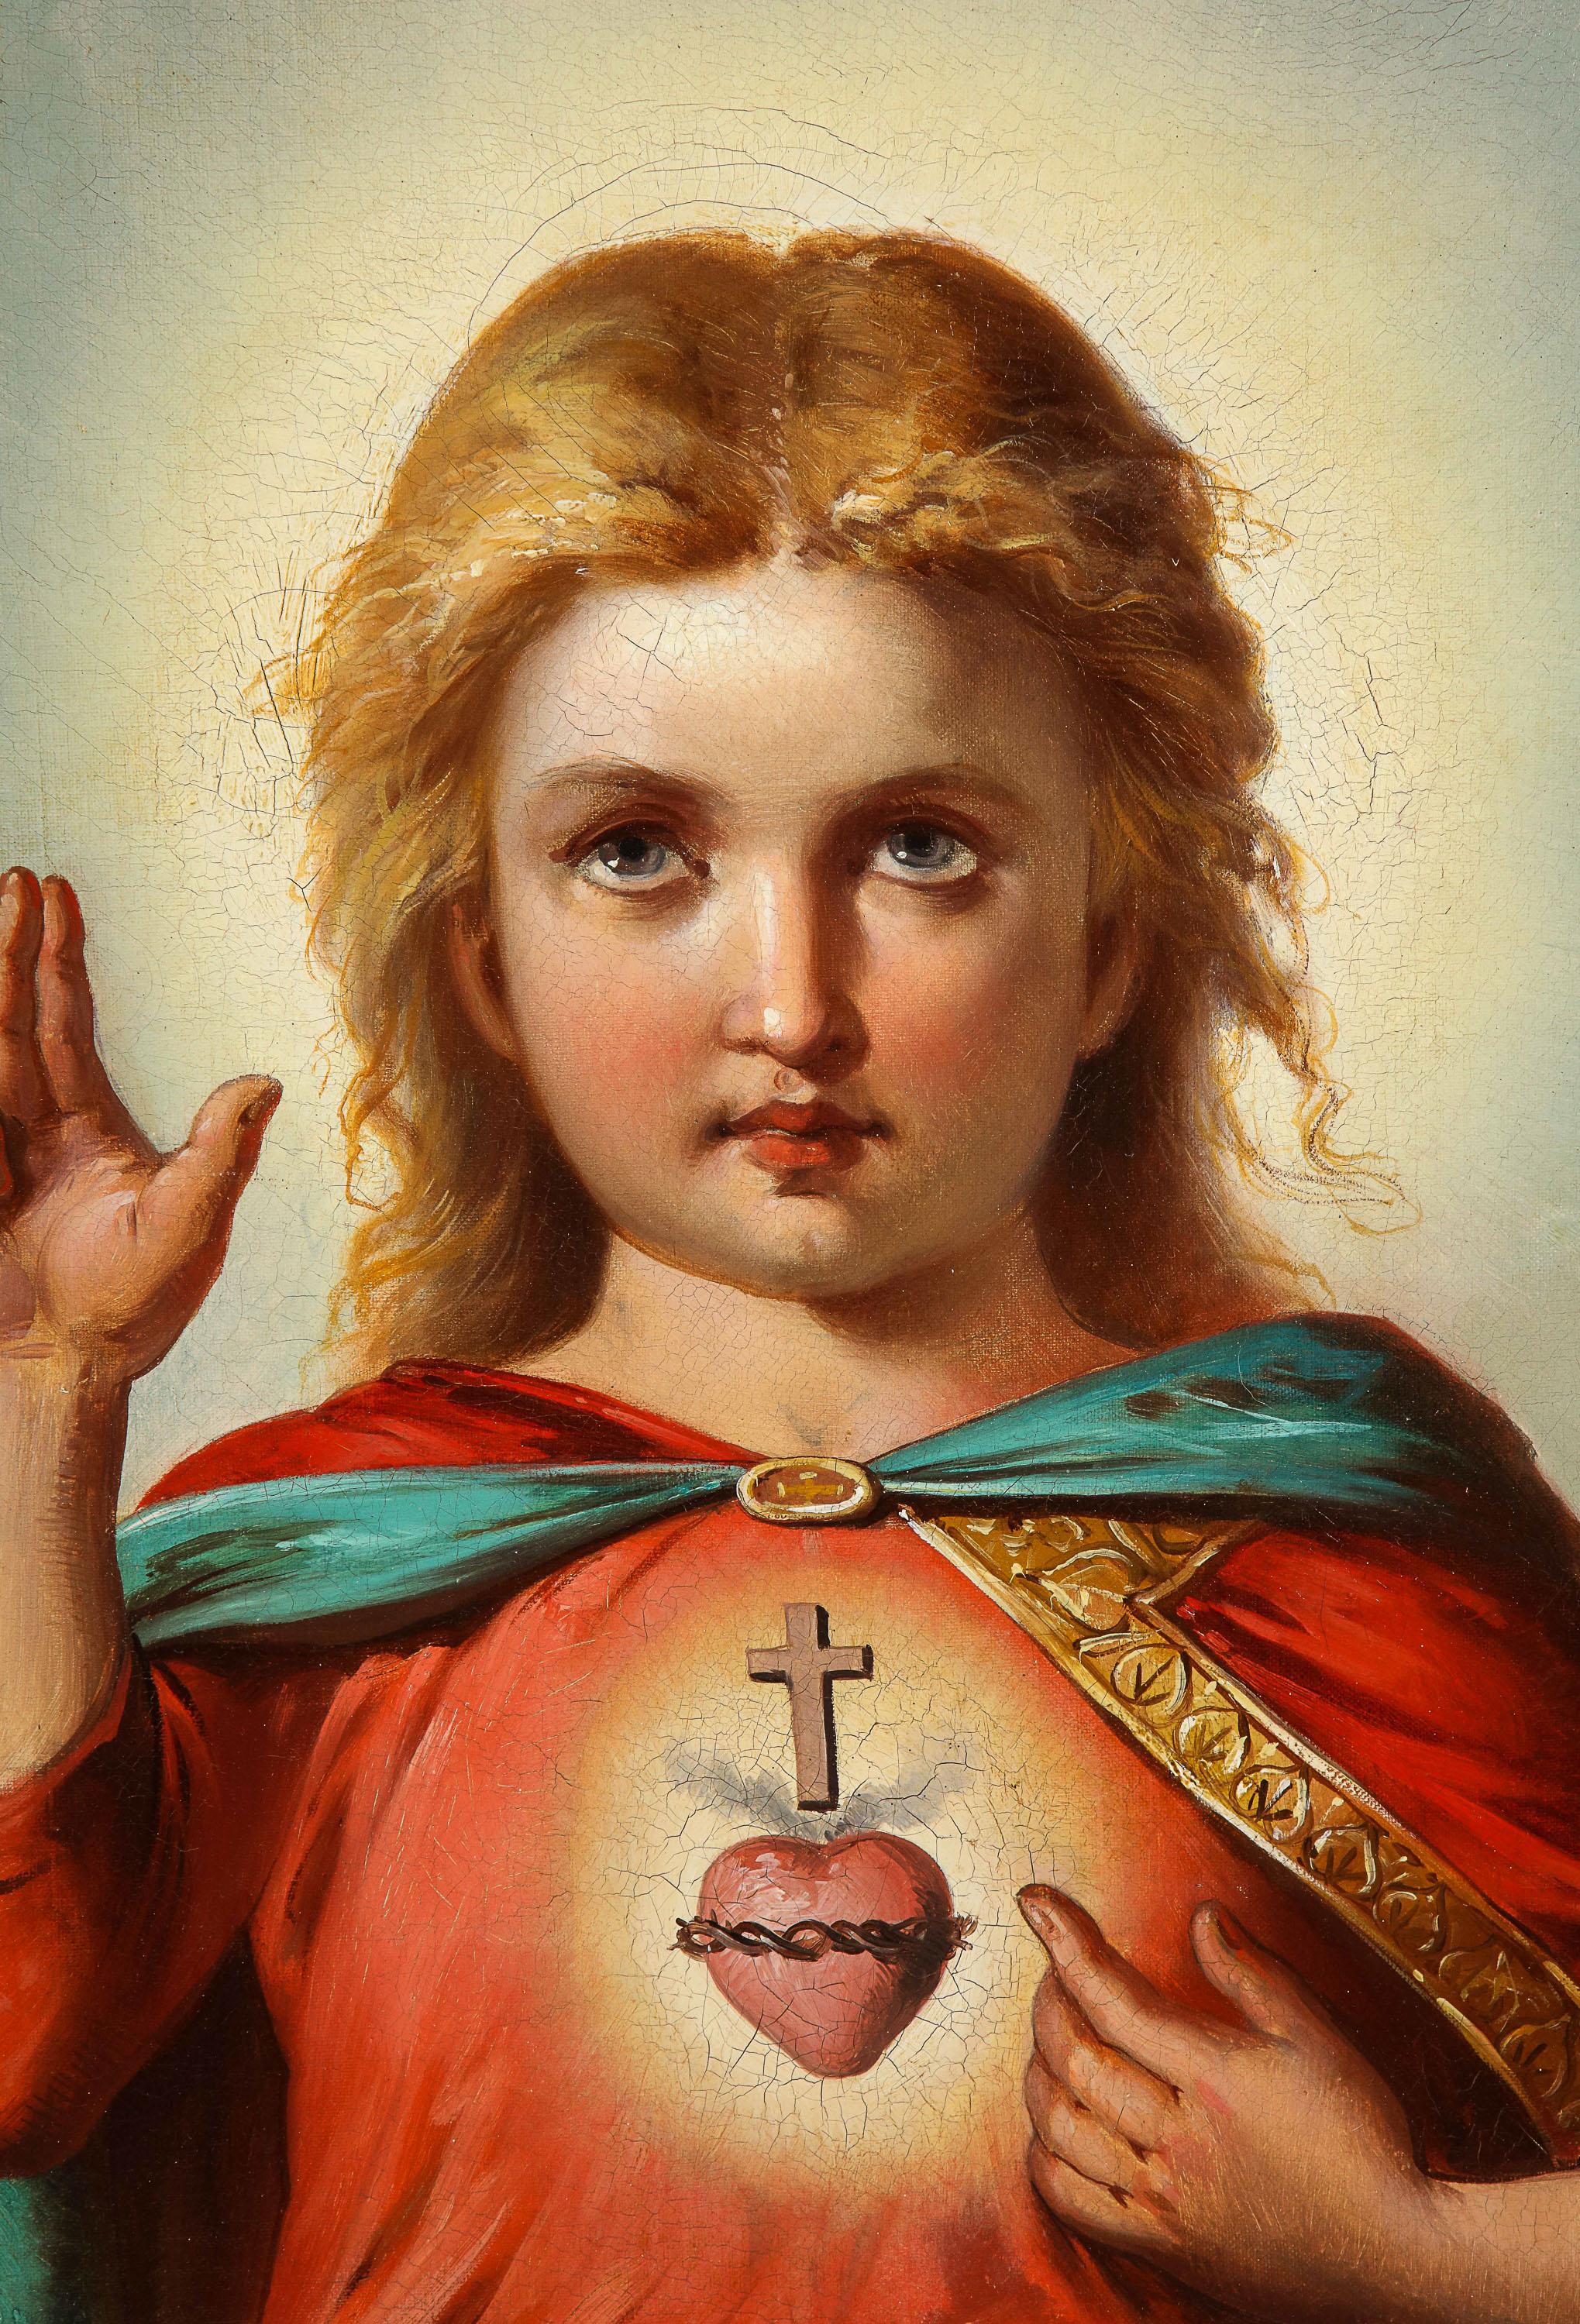 American School, (19th Century) Jesus Christ as A Baby Child, Oil Painting, circa 1860.

A truly exceptional quality oil on canvas painting of Baby Jesus Christ bearing the image of his sacred heart, with a shining light to his face. Very adorable